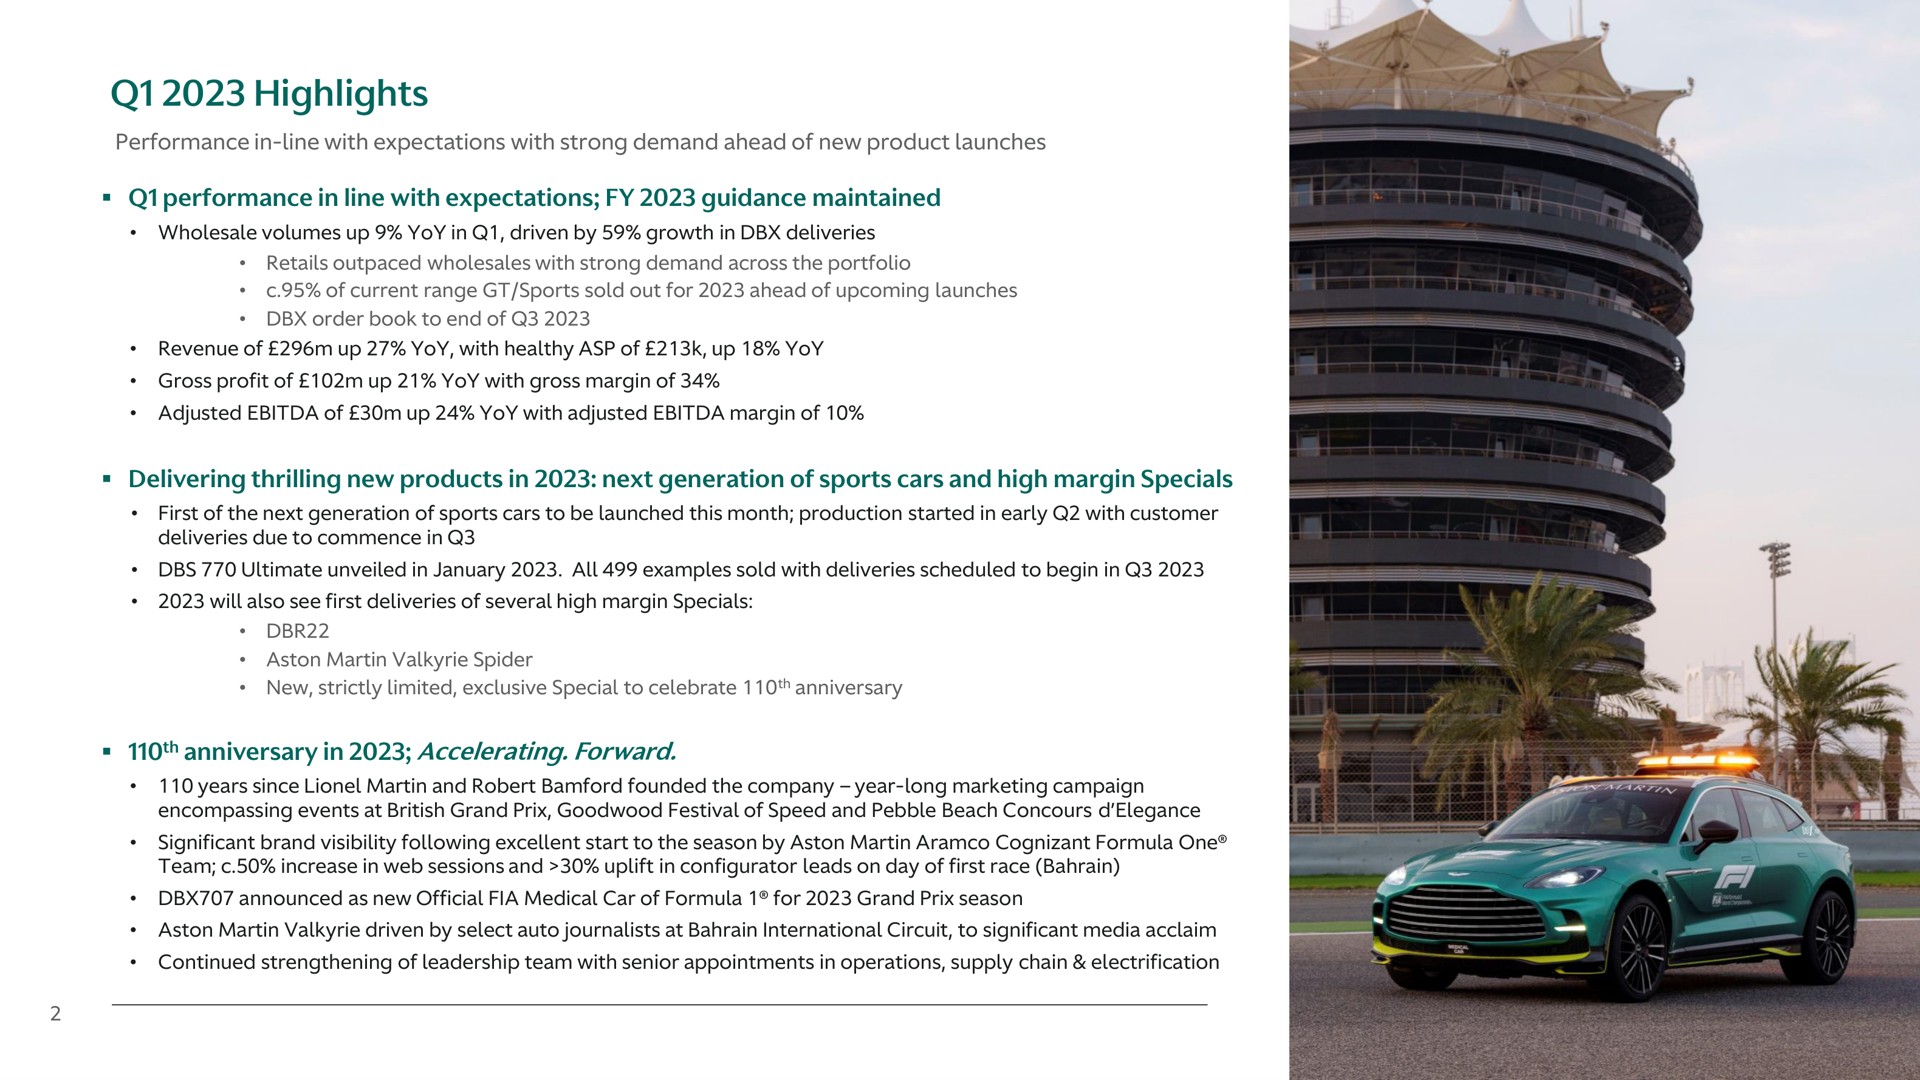 highlights performance in line with expectations guidance maintained delivering thrilling new products in next generation of sports cars and high margin specials anniversary in accelerating forward | Aston Martin Lagonda